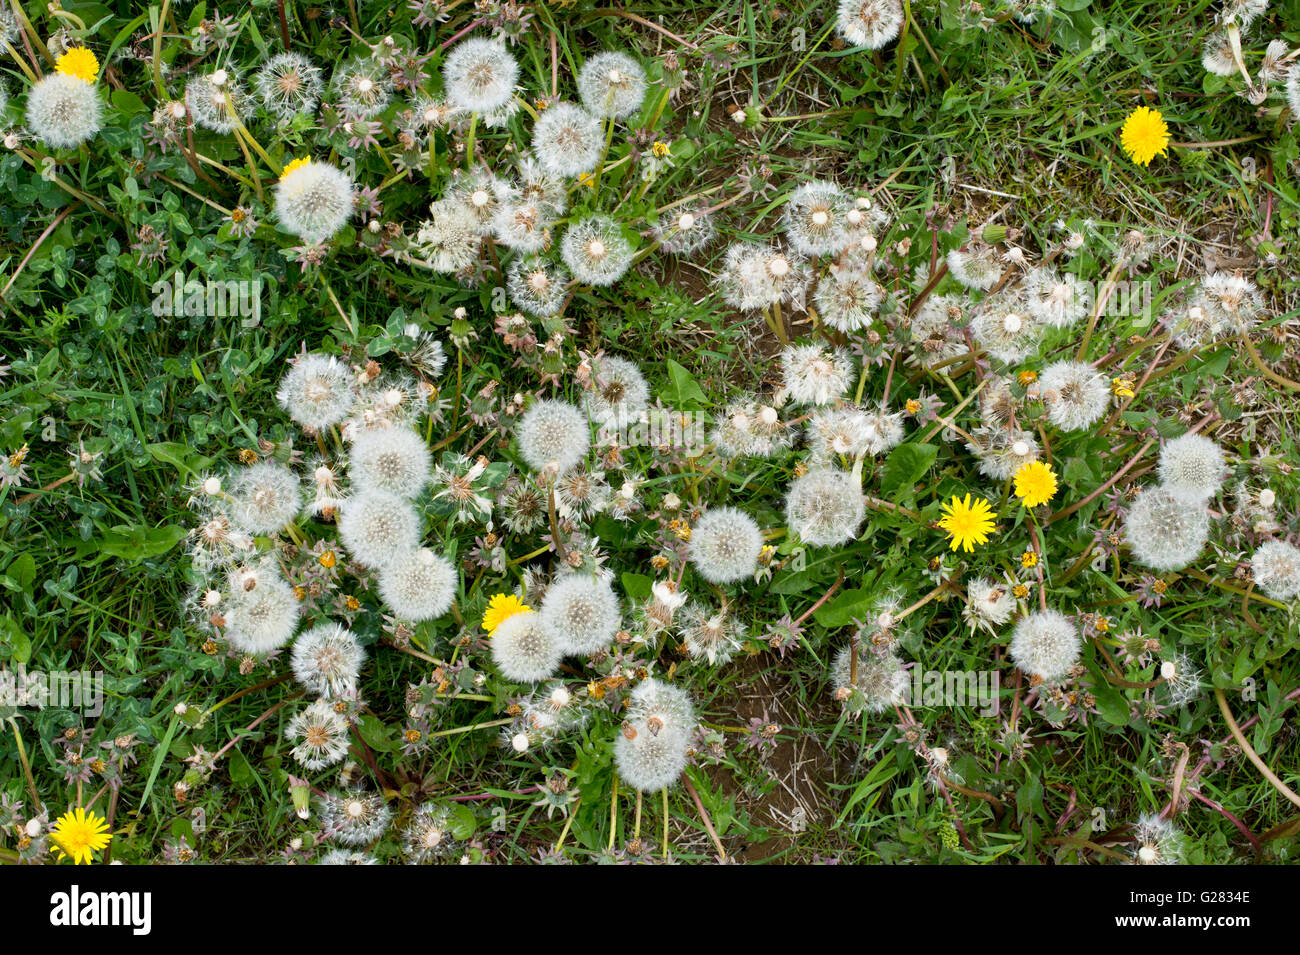 Dandelions gone to seed in grass in the english countryside Stock Photo